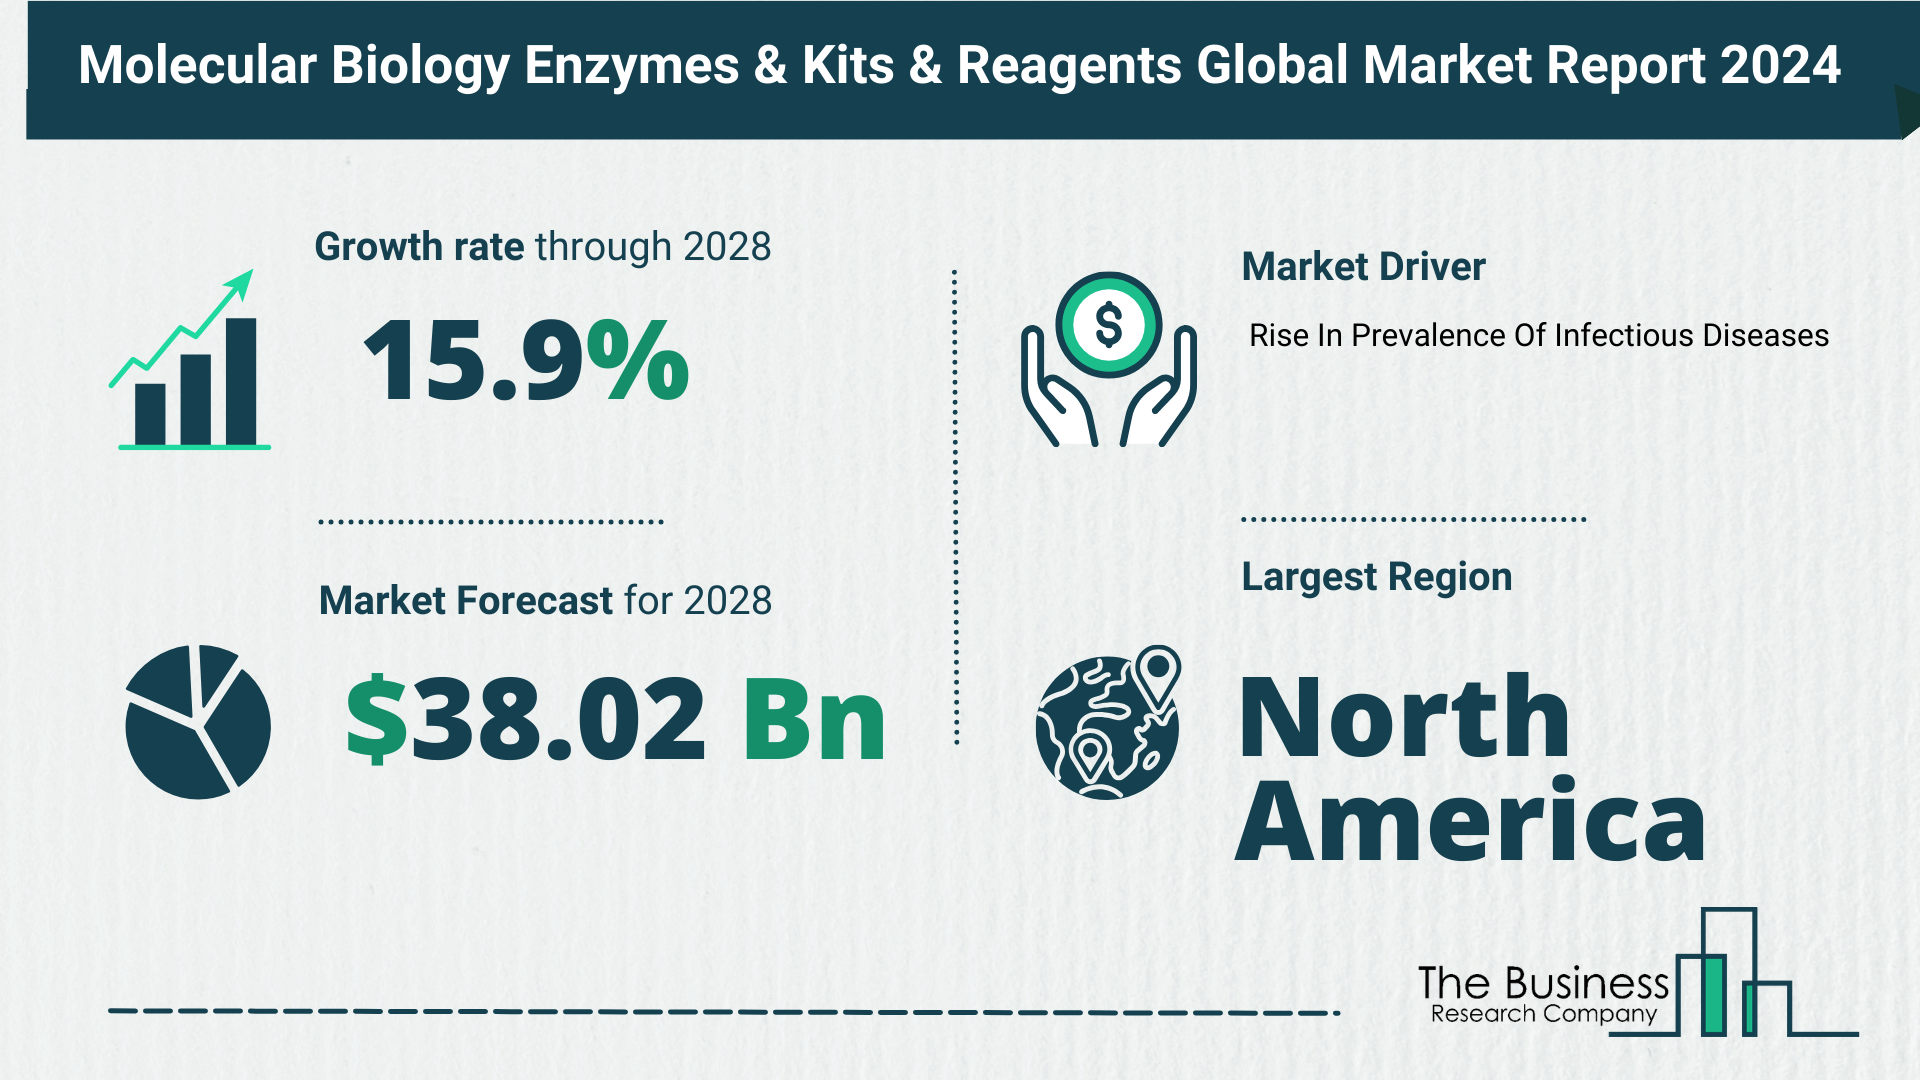 5 Takeaways From The Molecular Biology Enzymes And Kits And Reagents Market Overview 2024